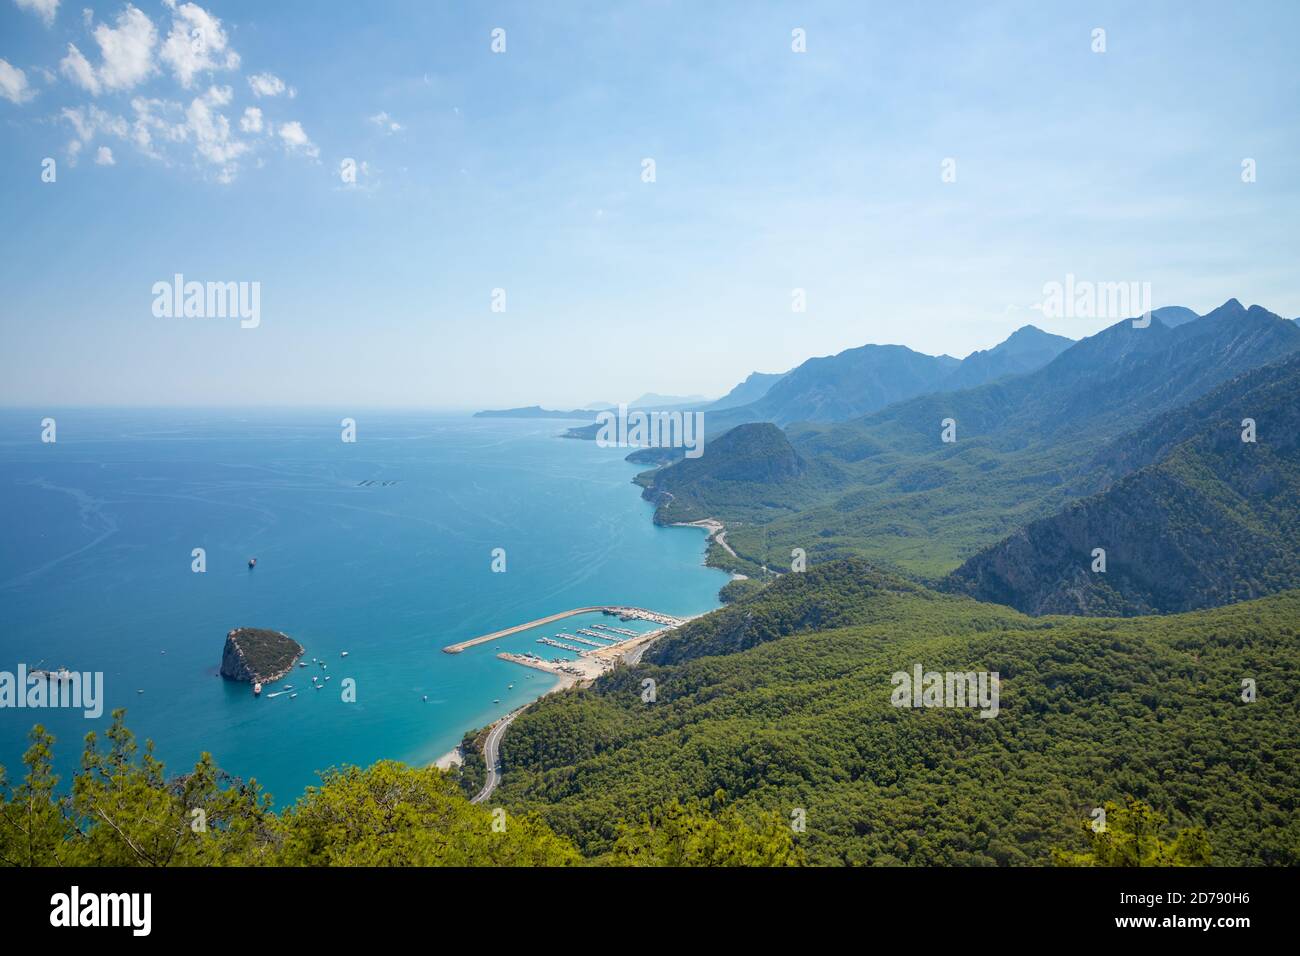 View from top on mountains along sea coast near Antalya, View from Tunektepe Cable car, Turkey Stock Photo